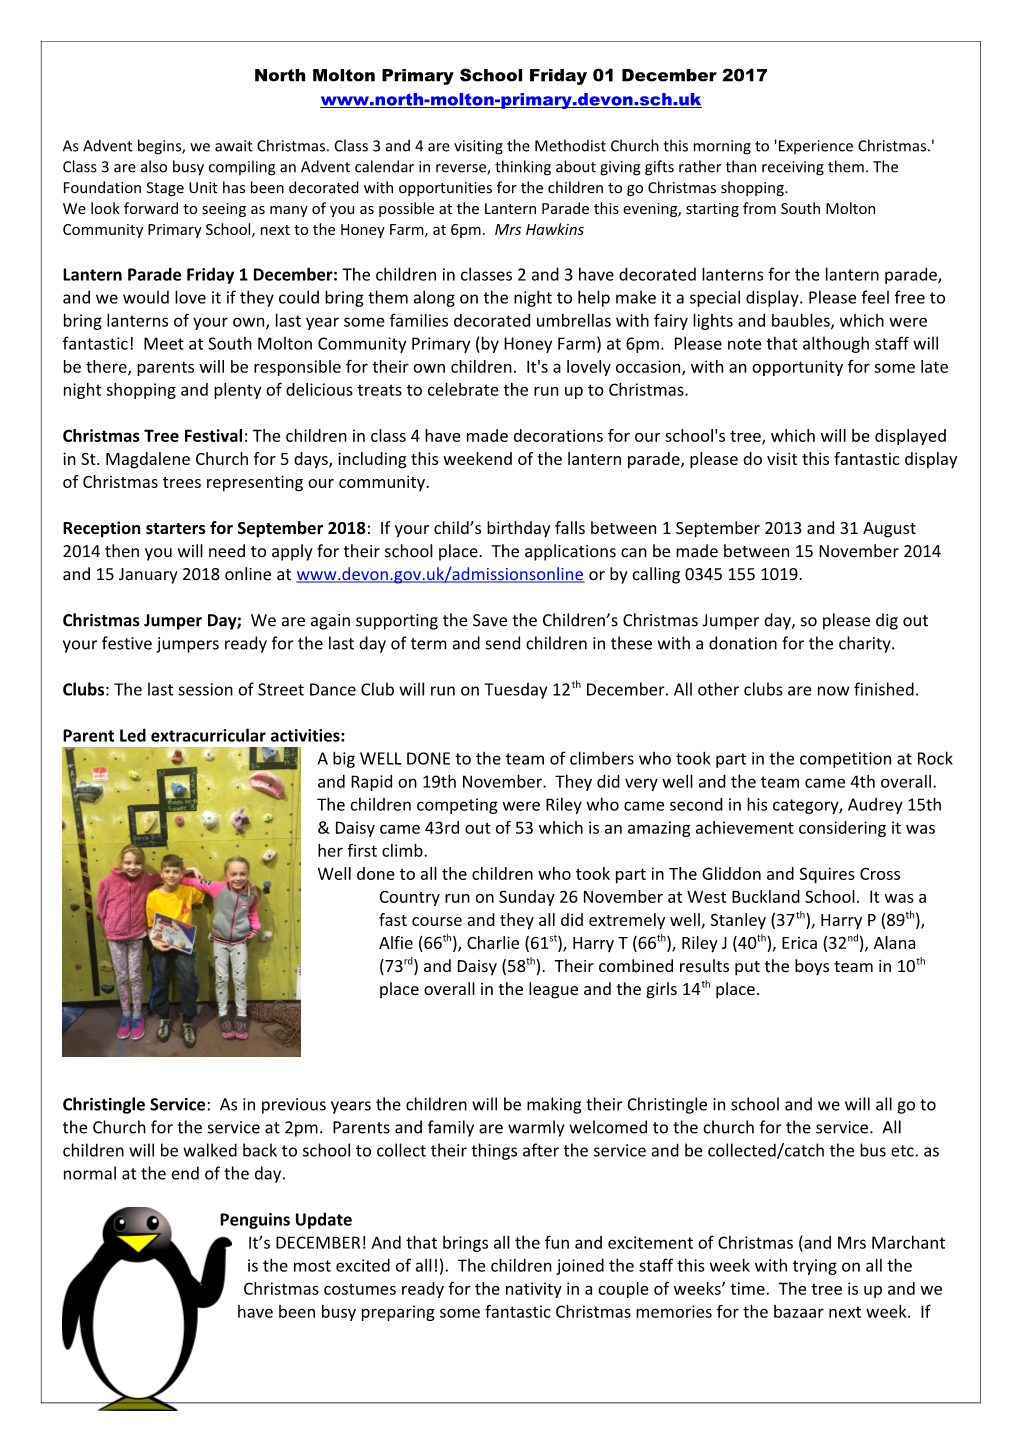 North Molton Primary School Friday Newsletter 27 June 2008